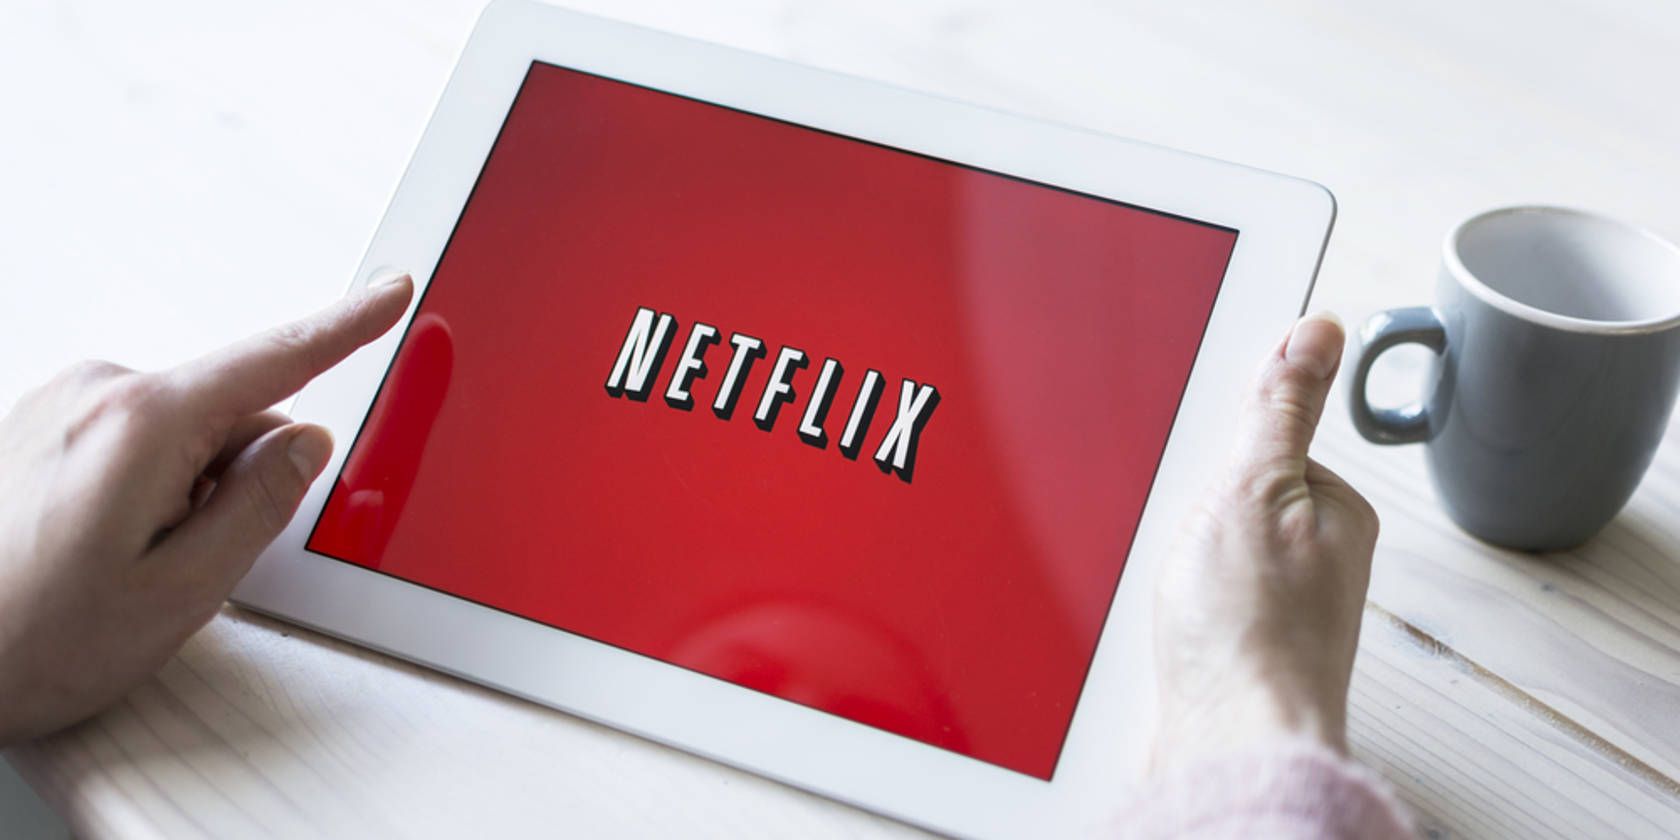 What's New on Netflix in October?